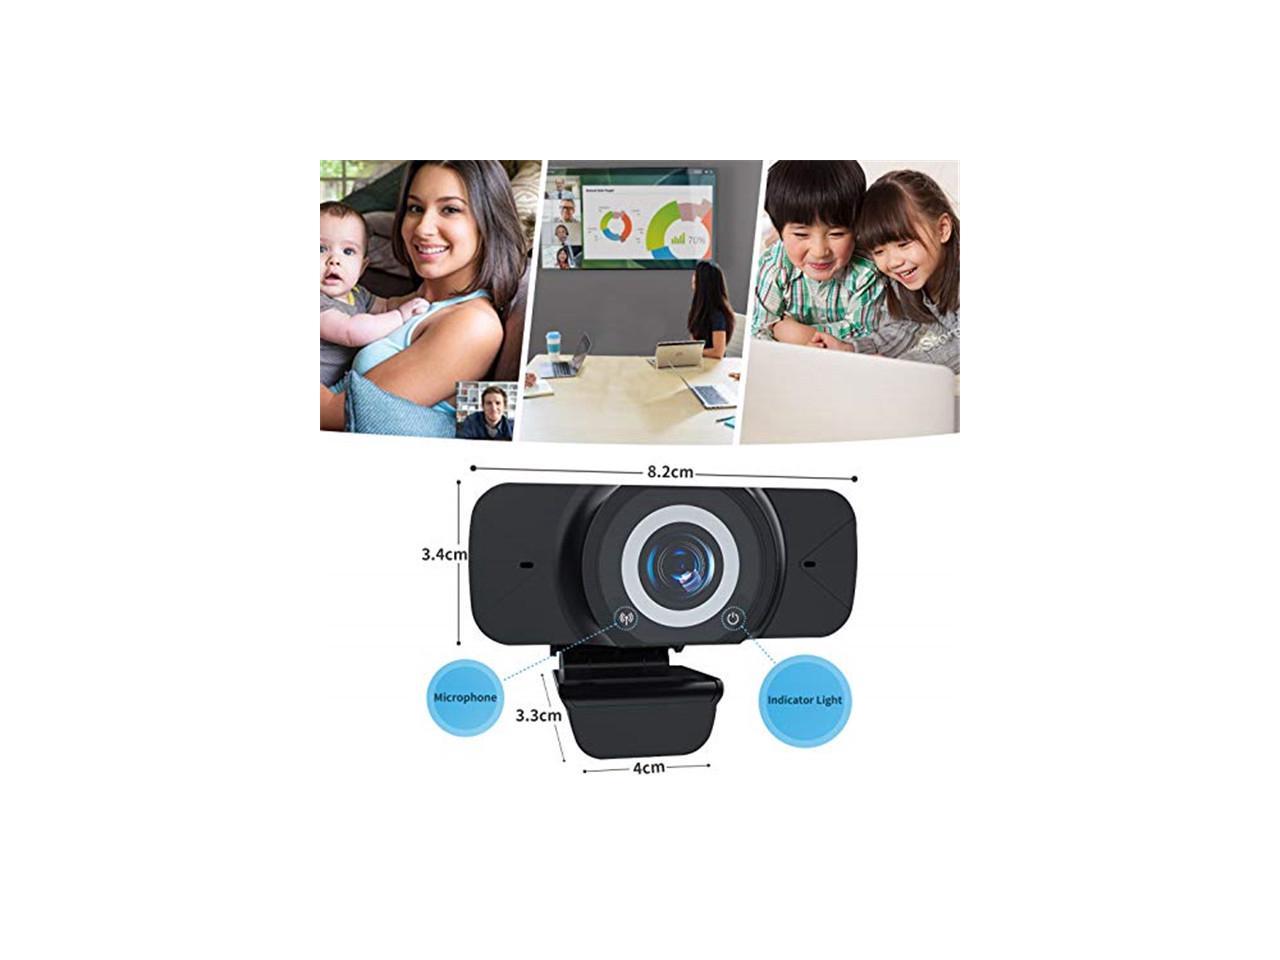 CNSL Full HD 1080P Computer Camera,Auto Focus Face Web Camera,Portable Widescreen USB Webcam for PC Laptop Desktop Mac Gaming Video Calling Recording Conferencing Skype YouTube Webcam with Microphone 